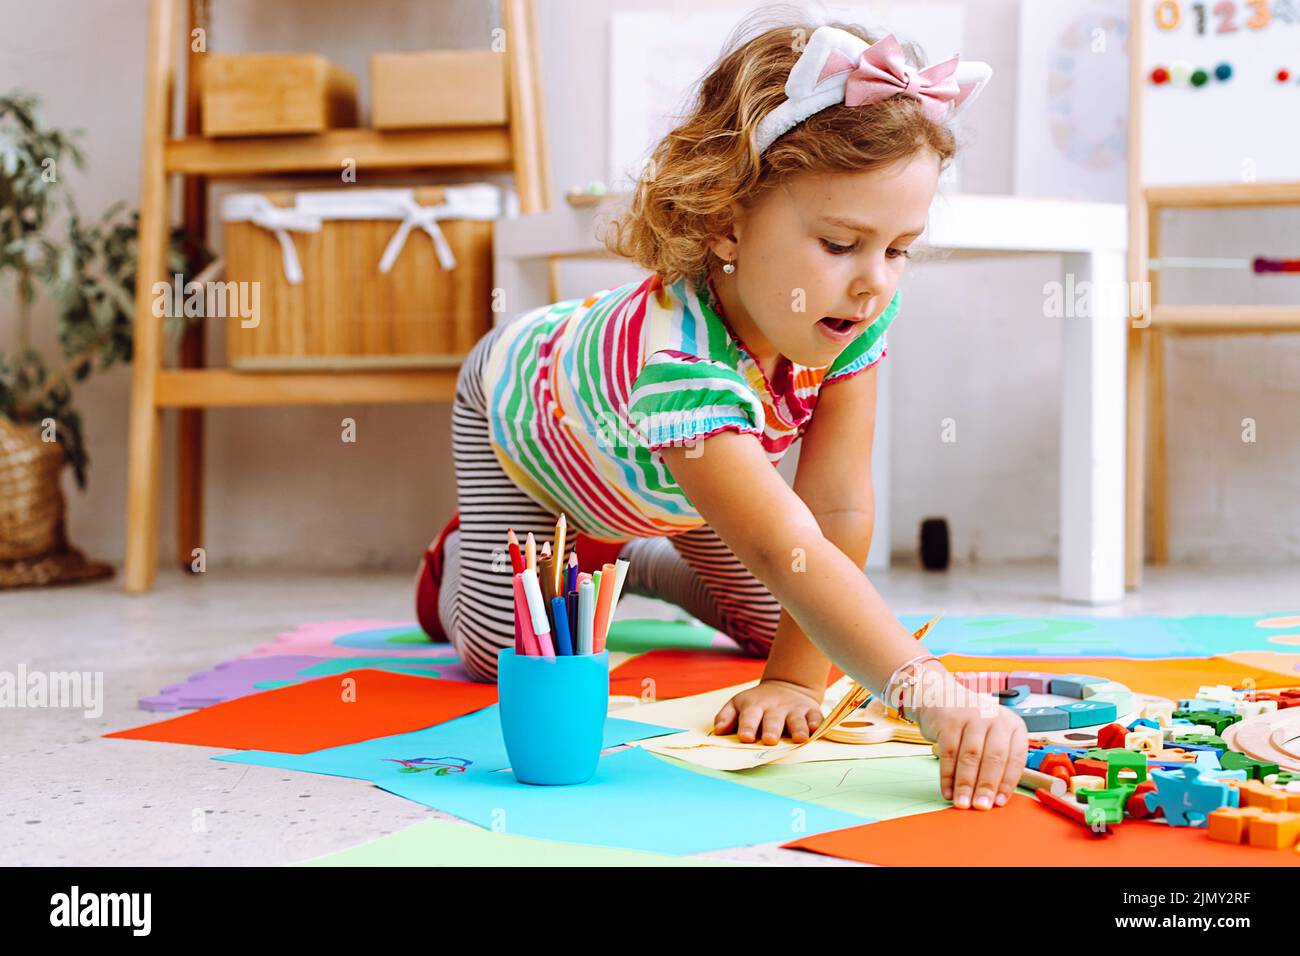 Kids drawing on white sheet of paper with crayon,closeup Stock Photo - Alamy